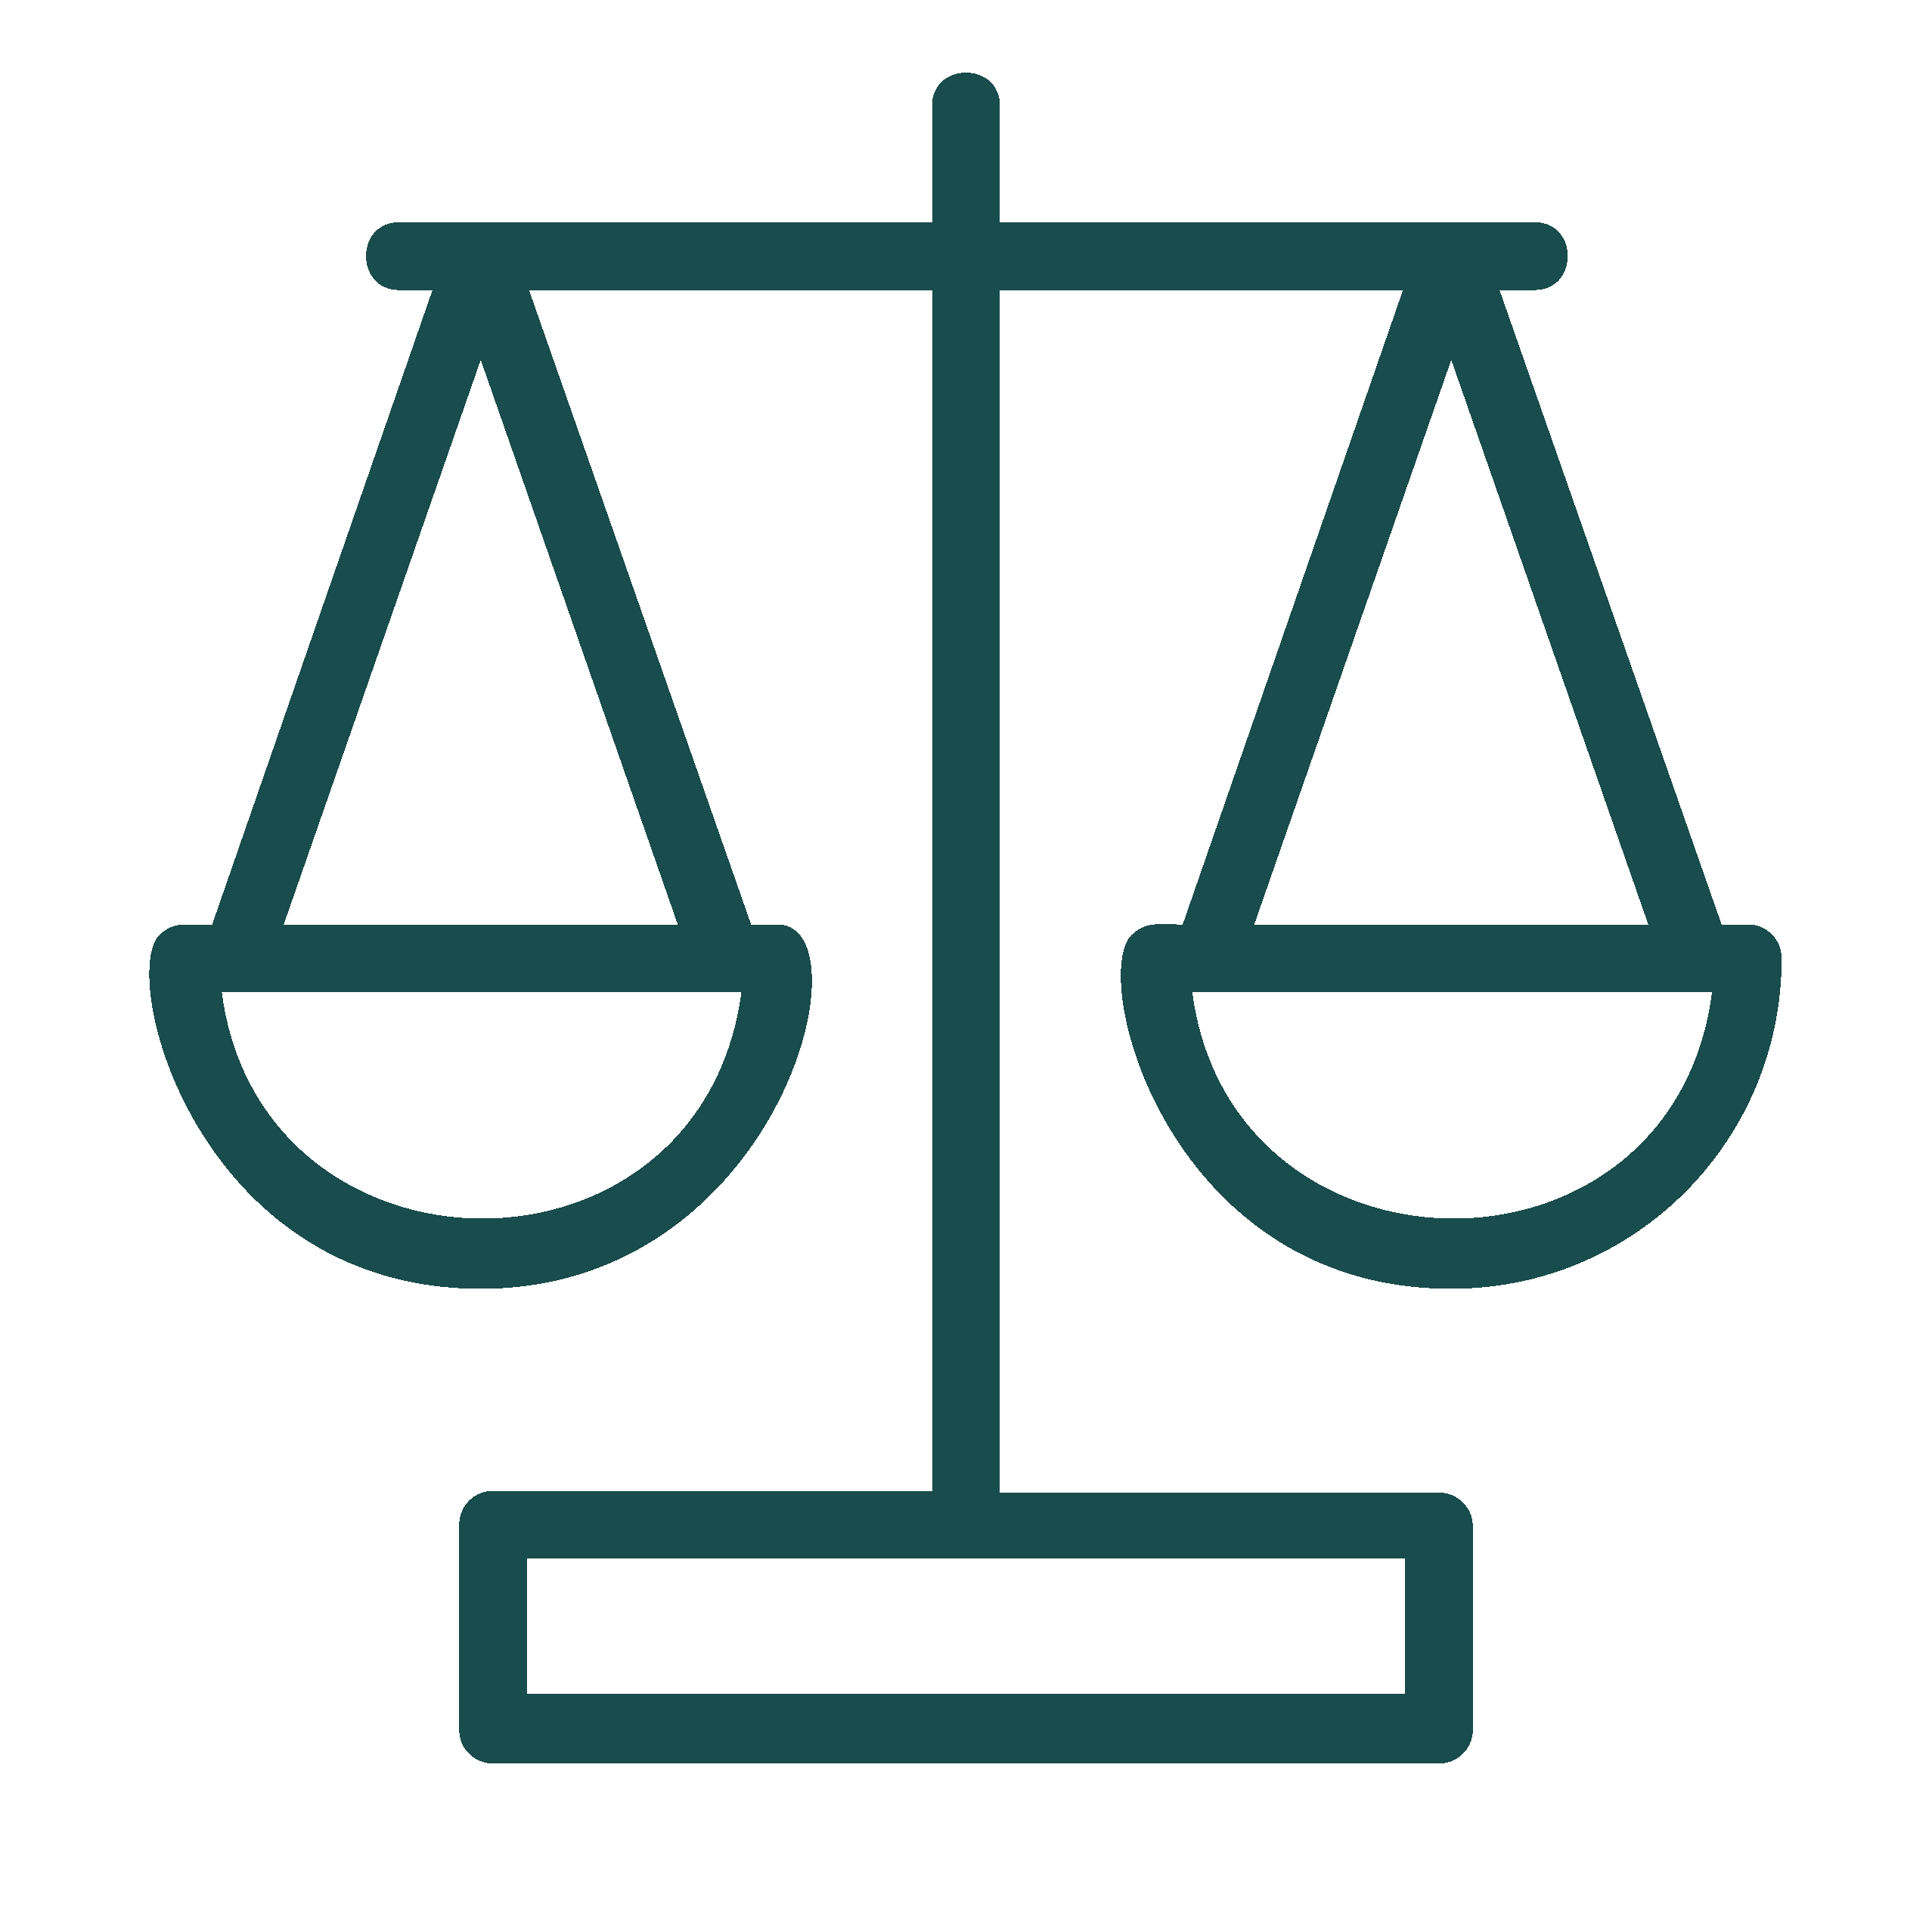 weights and balance icon illustrates legal issues that apply to applications of software engineering